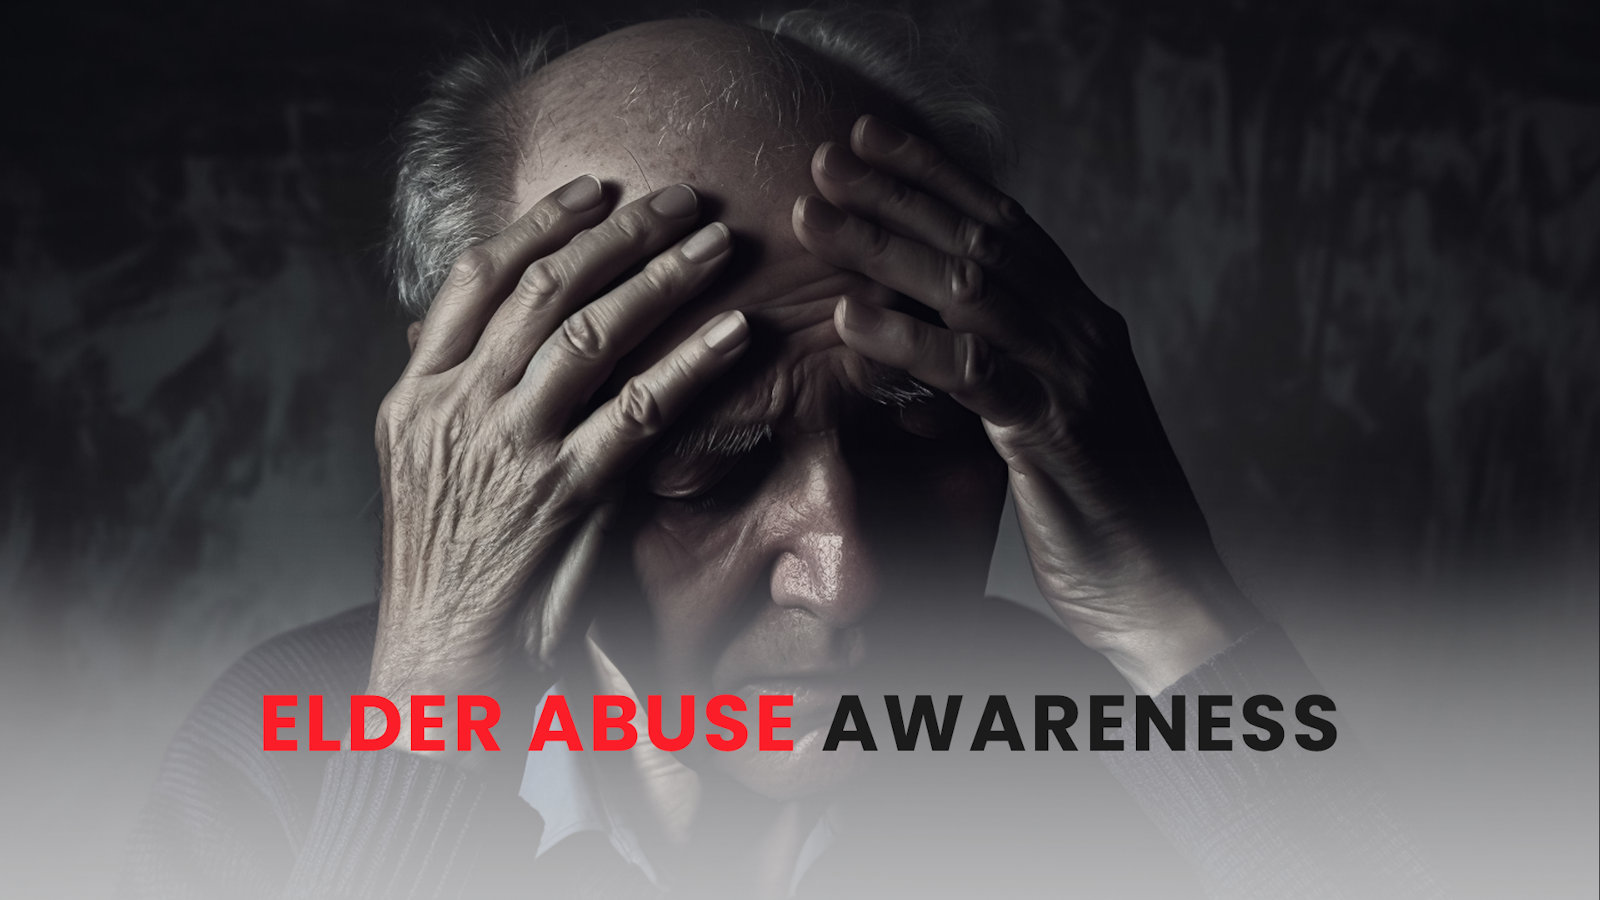 ELDER ABUSE AWARENESS – MY NOBLE CARE